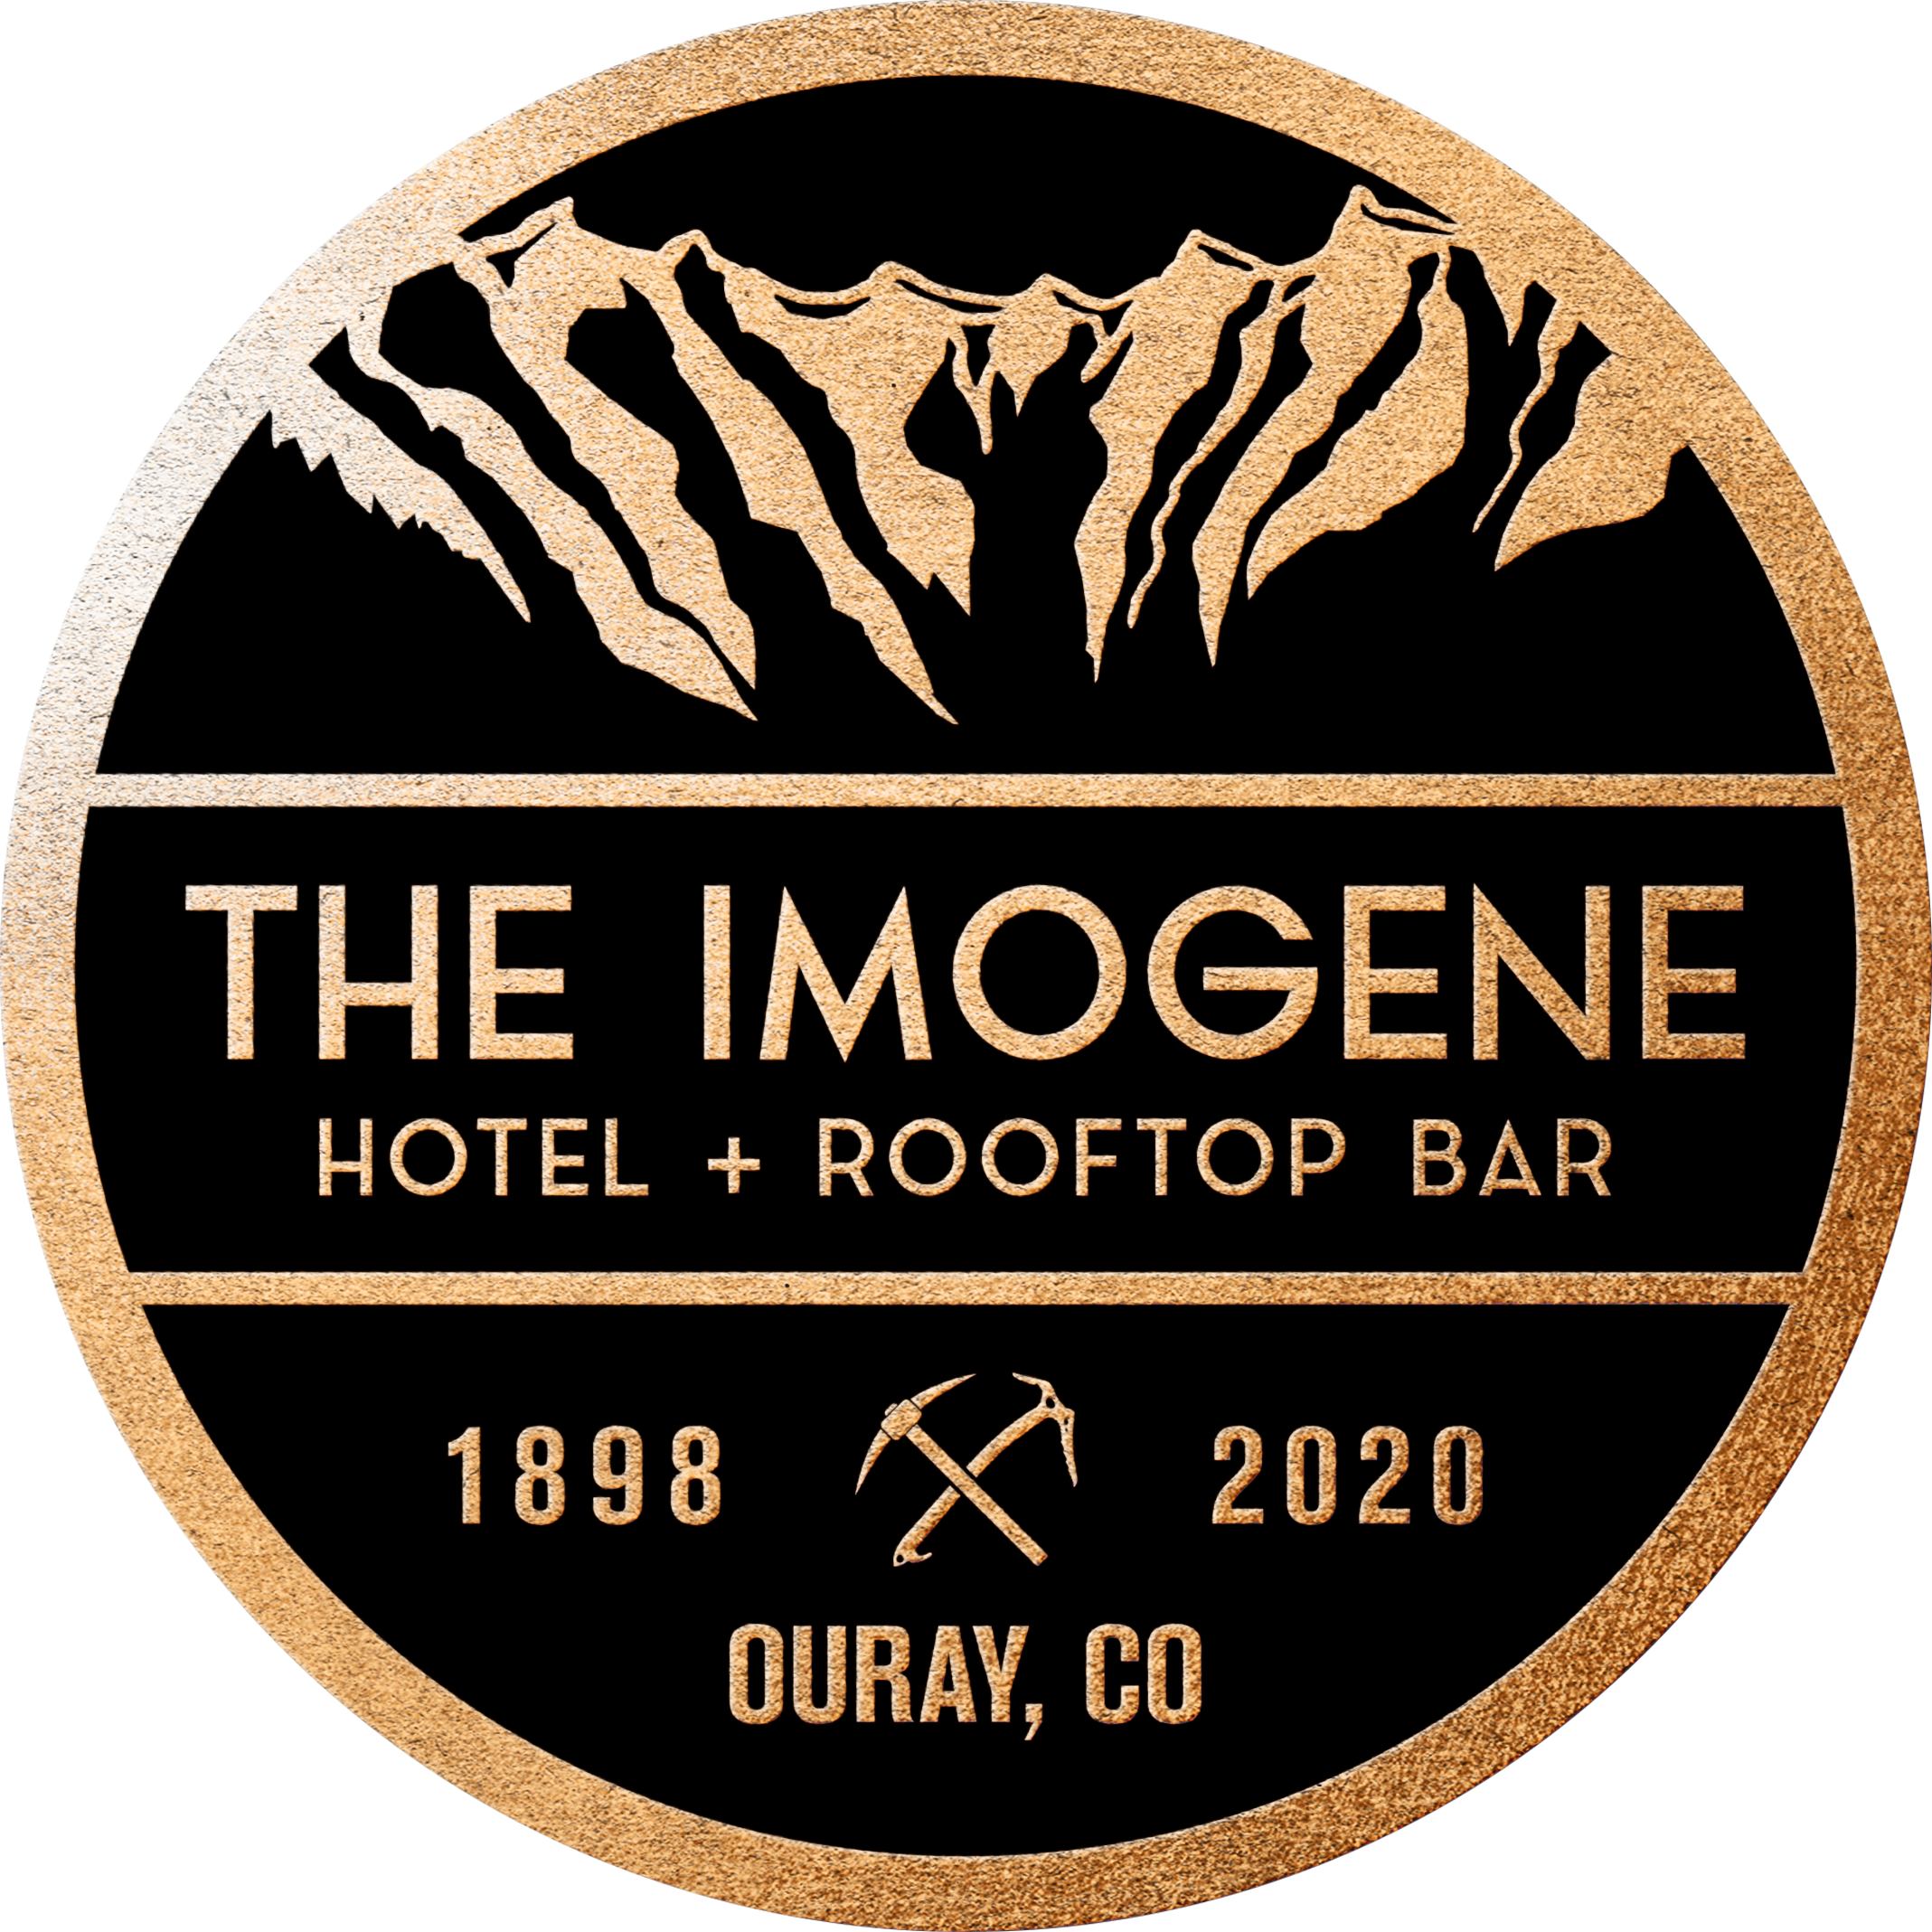 the imogene + rooftop bar logo, scroll down to get to the site navigation